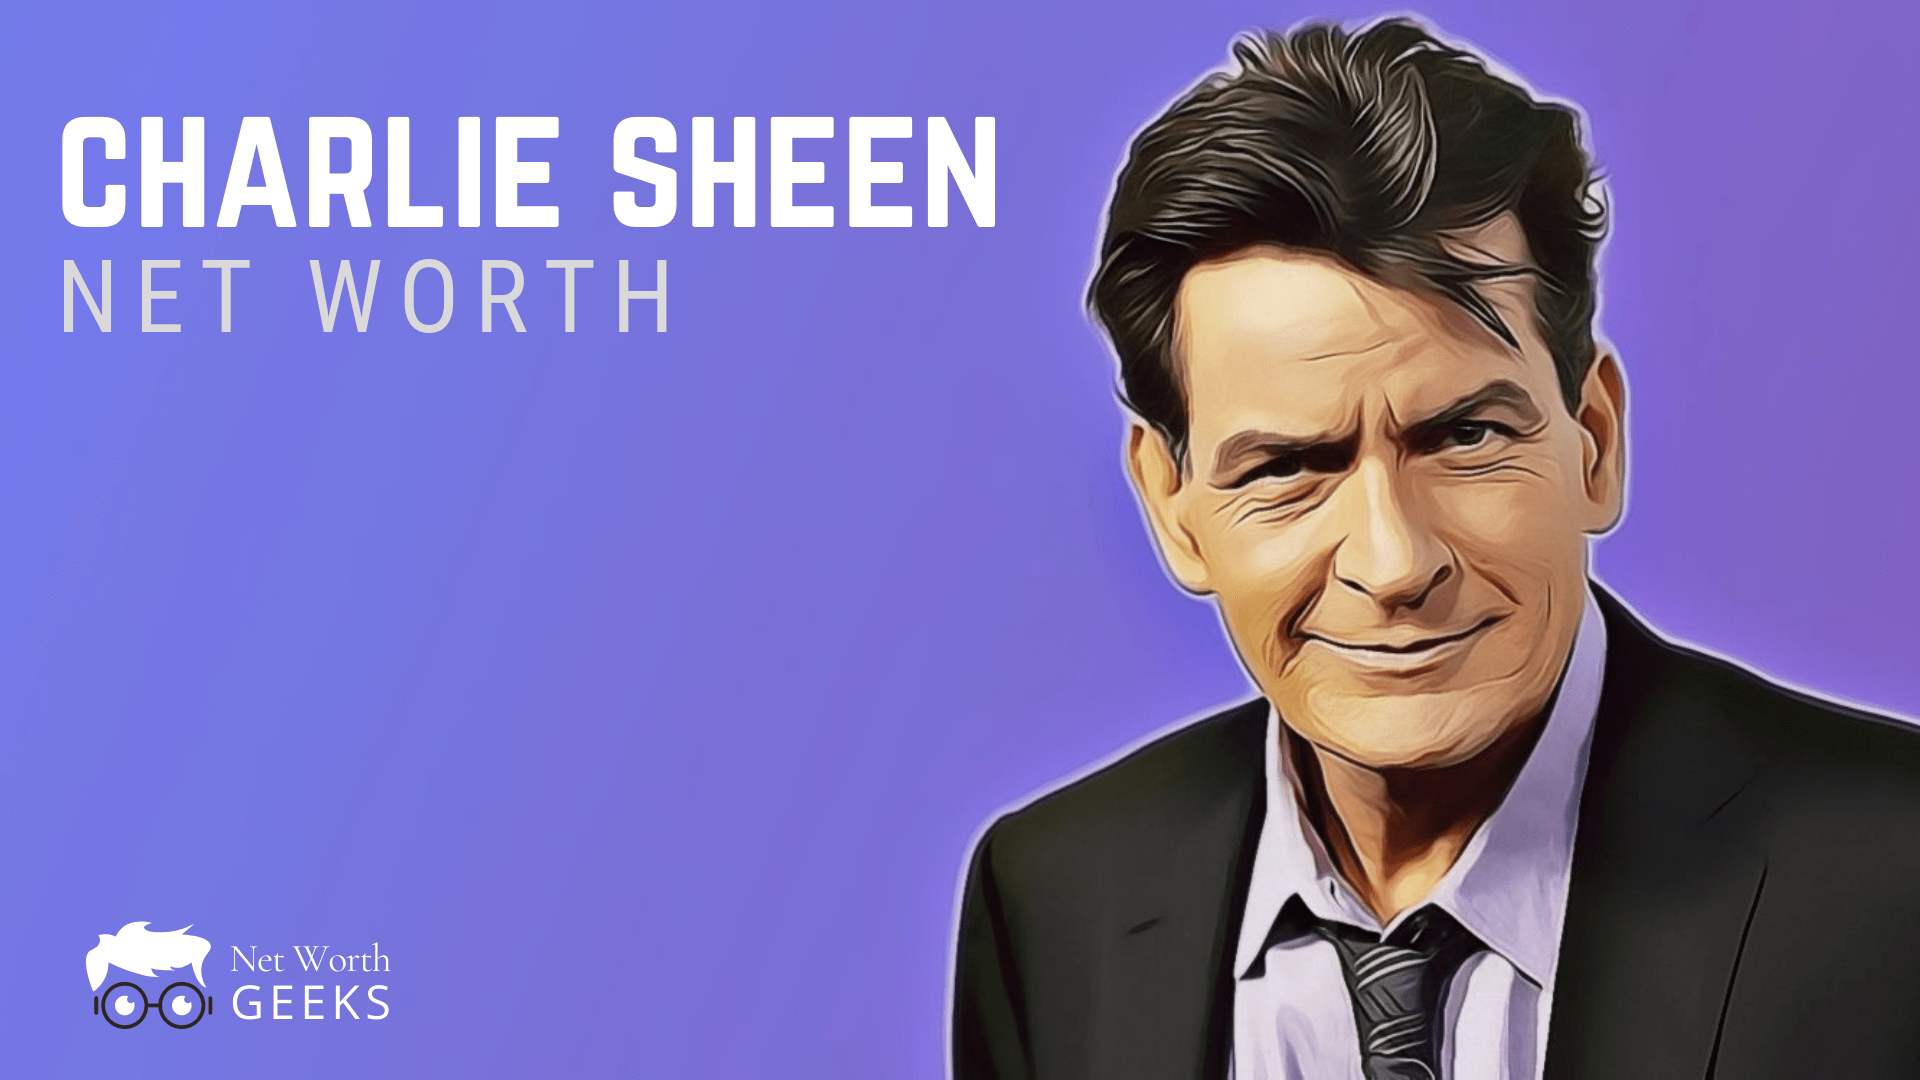 Charlie Sheen Net Worth 2021, Age, Height, Weight, Wiki & Quotes